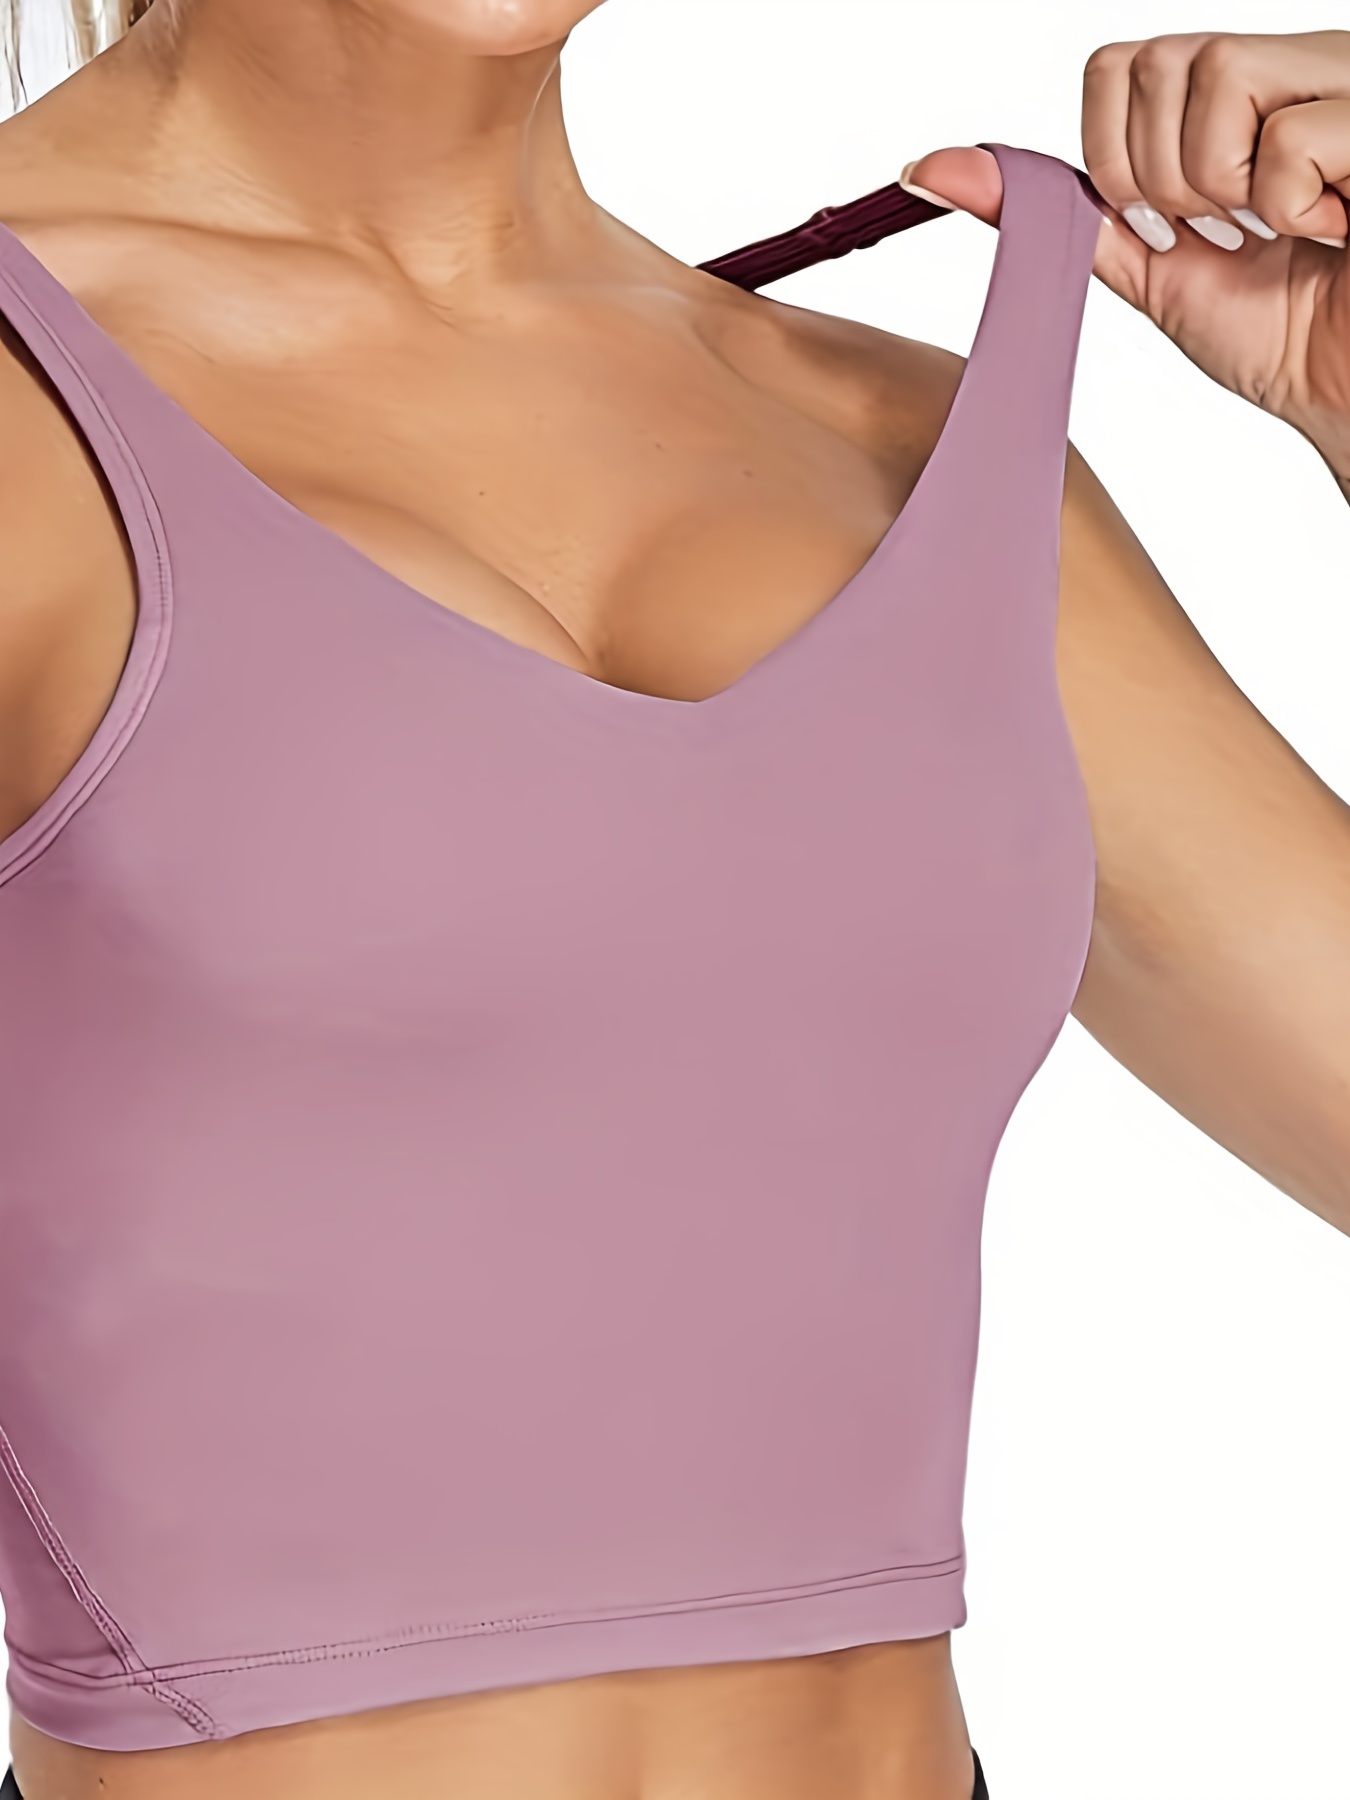 LAK 18 Women Cotton Padded Longline Sports Bra Cami Tank Top for Workout  Fitness Yoga Free Size (28 to 34), Pack of 1 (PINK)